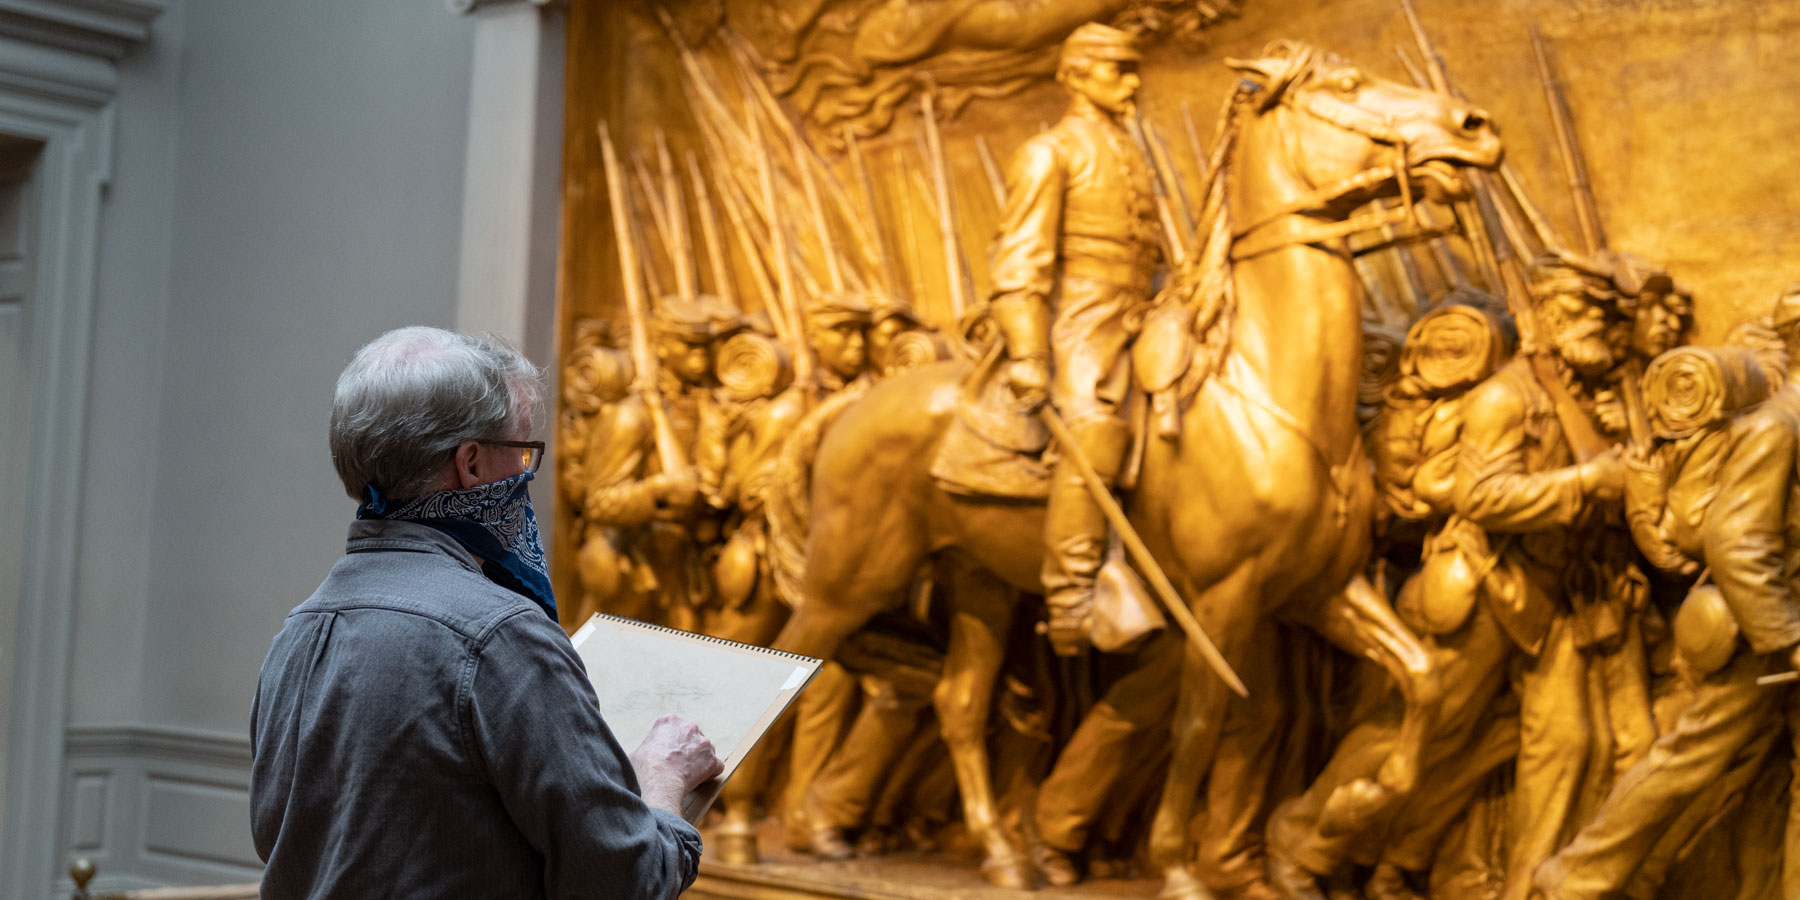 A person with a bandana facemask on is sketching a sculpture depicting Union Army soldiers marching off to battle with their officer on his horse.